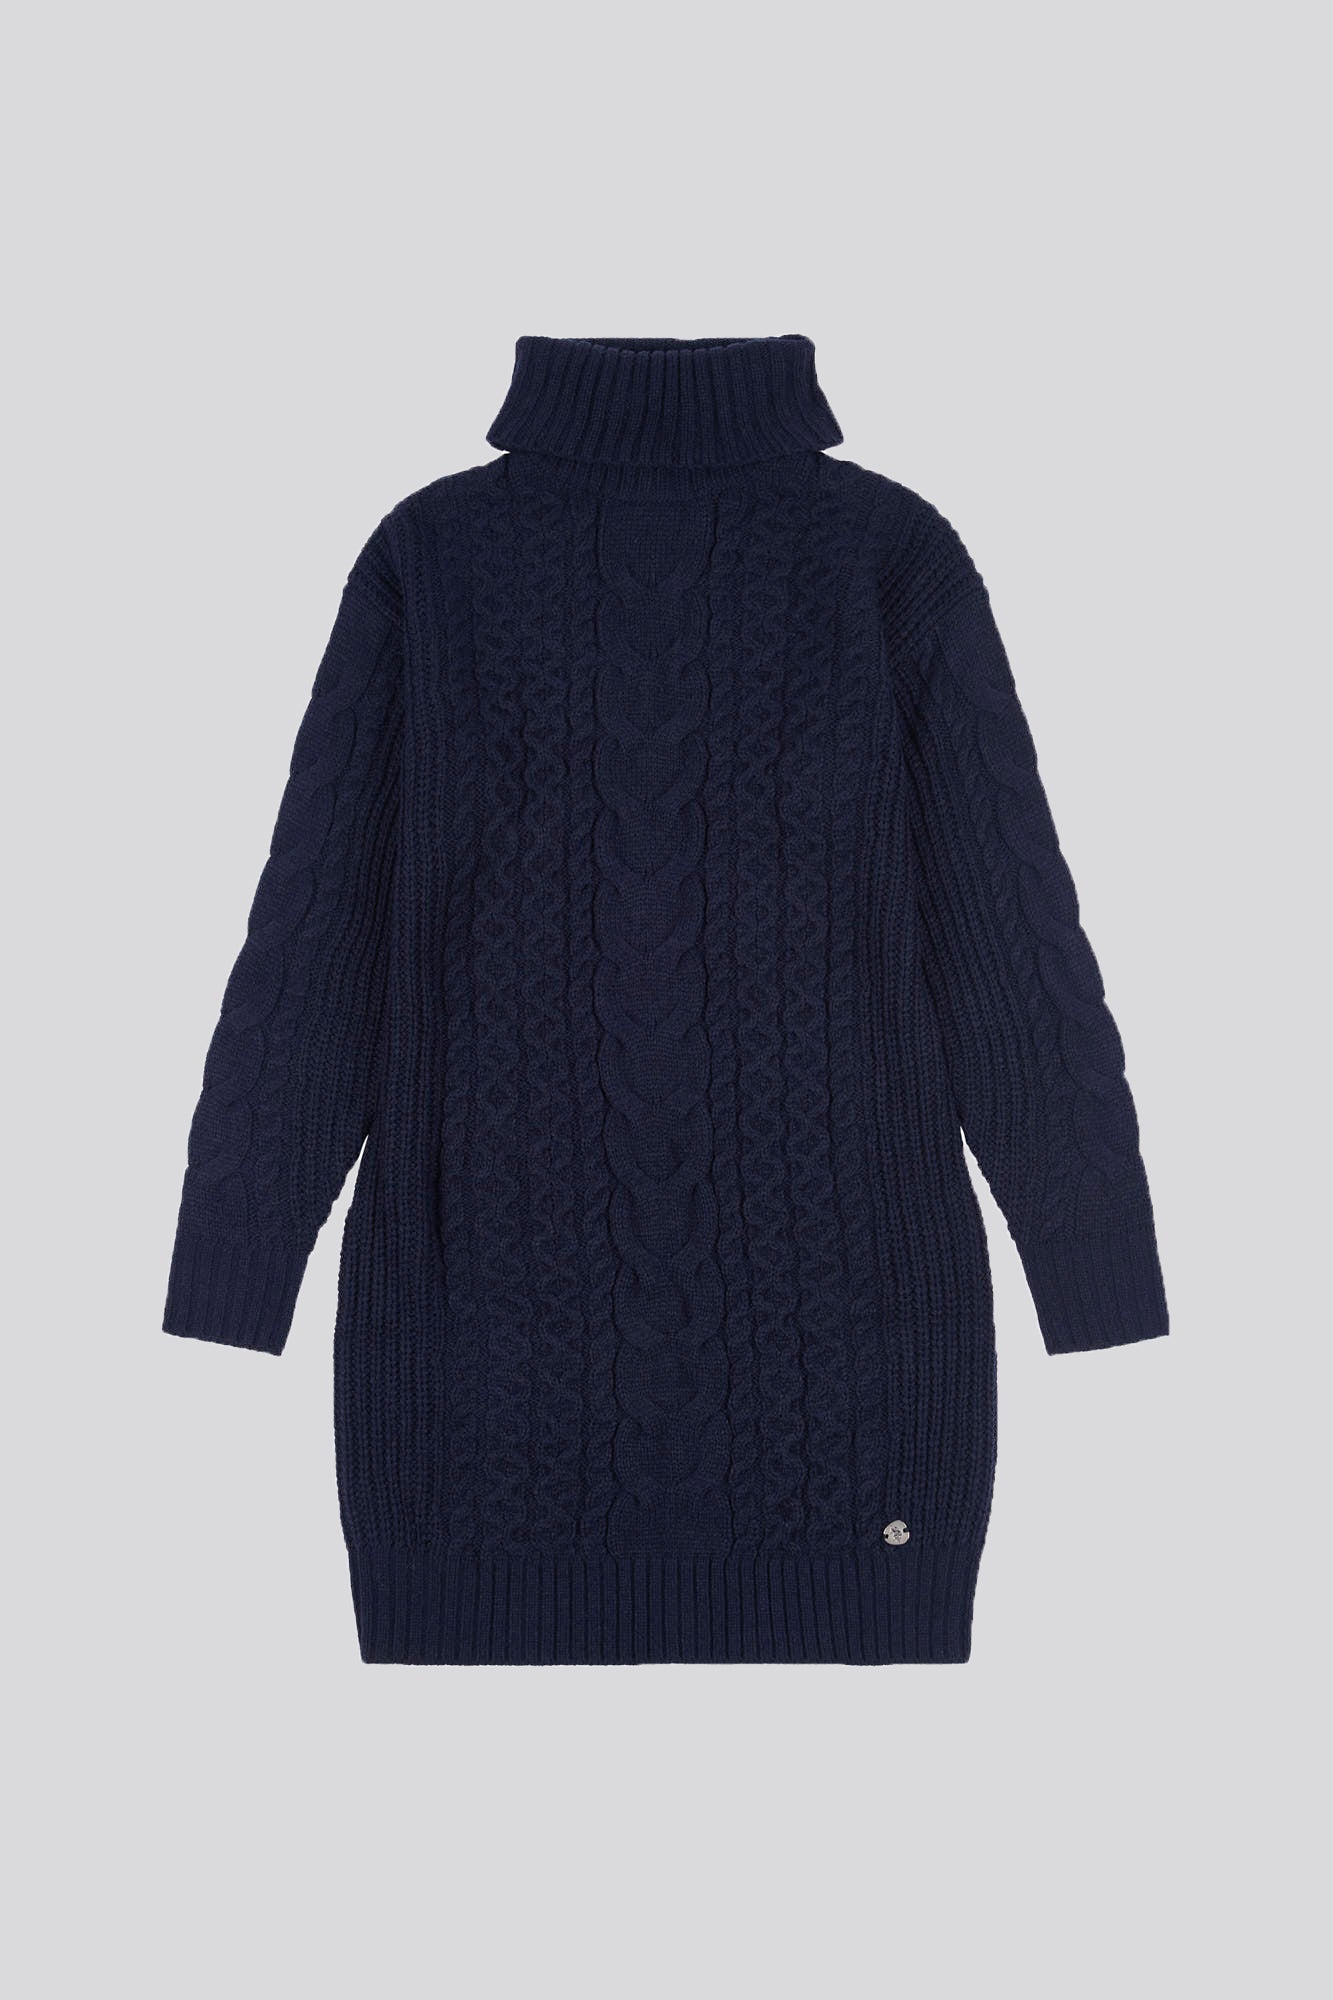 U.S. Polo Assn. Womens Mixed Cable Knit Dress in Navy Blue